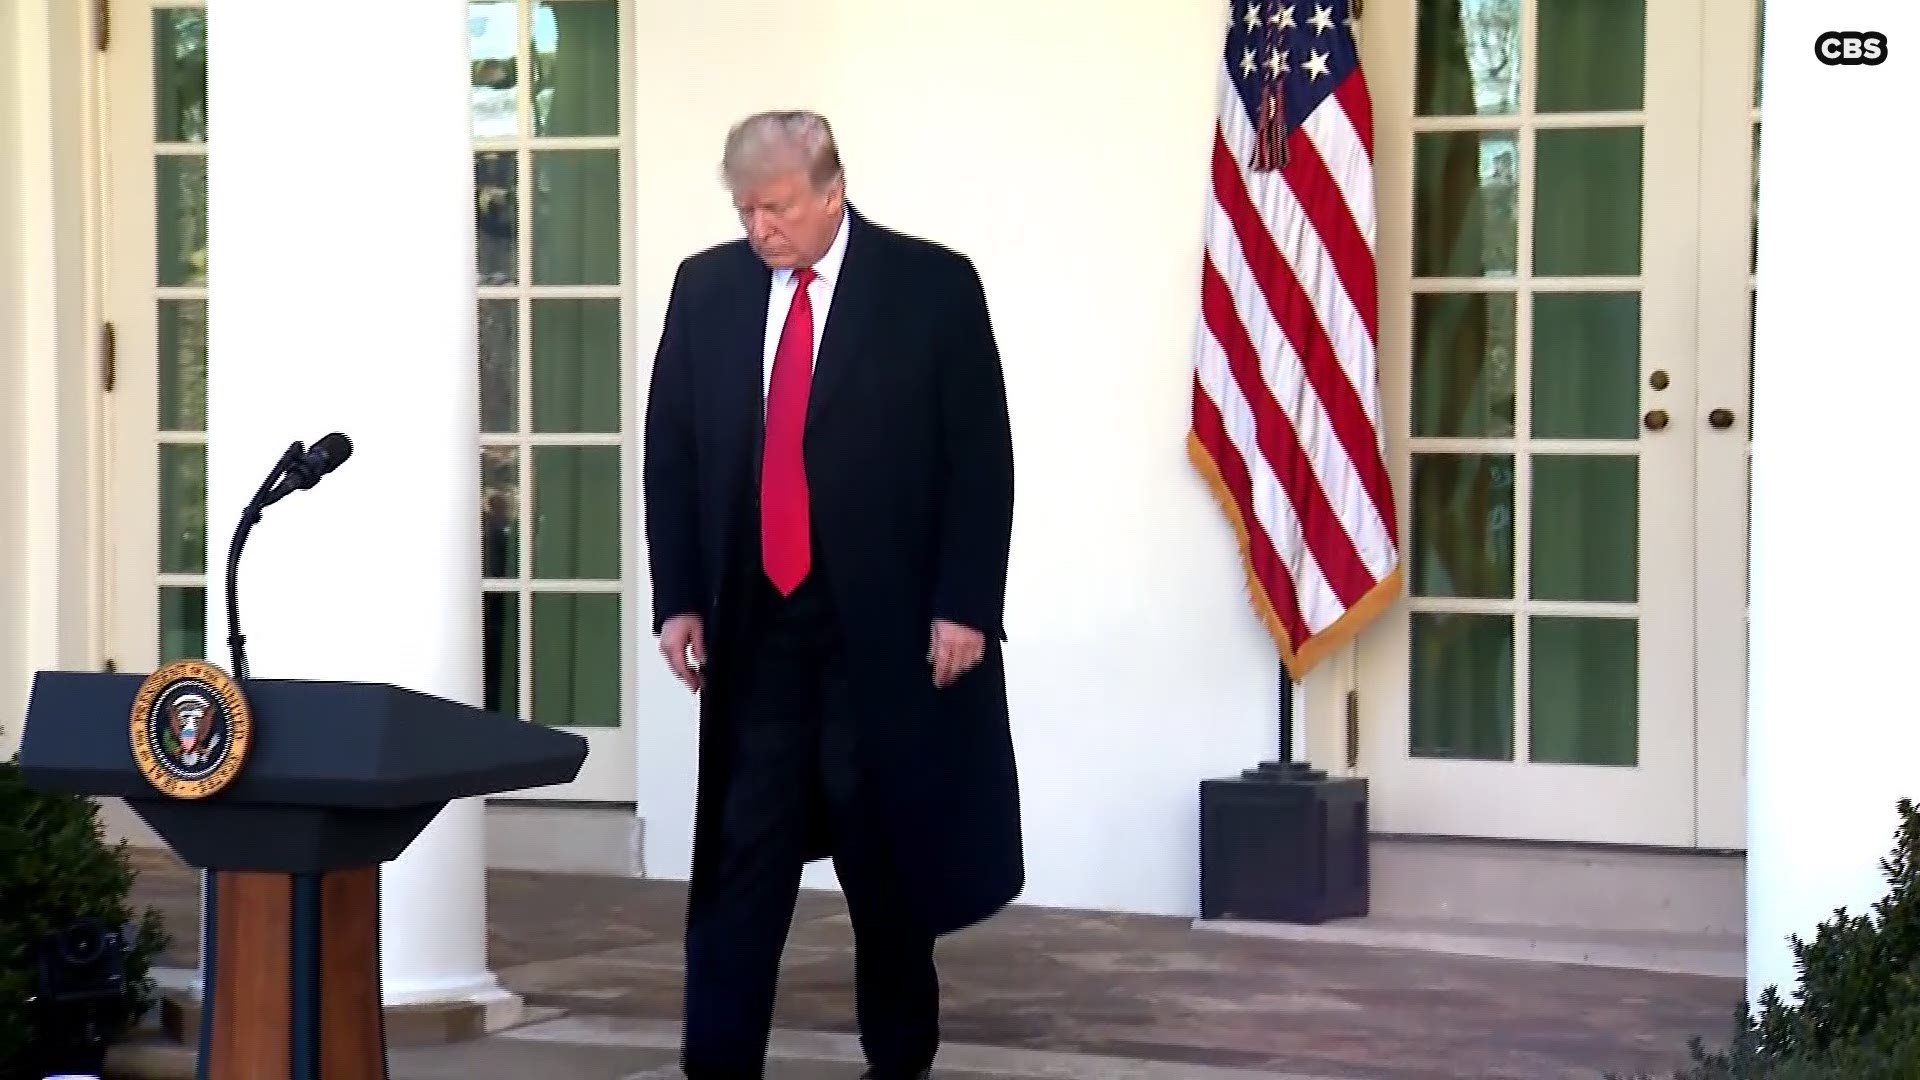 "I am very pleased to announce that we have reached a deal to end the shutdown and open the federal government," President Trump said. He added that he had the opportunity to declare a national emergency to build the wall but decided not to do so at this time. Trump also thanked the federal workers who had been furloughed or working without pay.